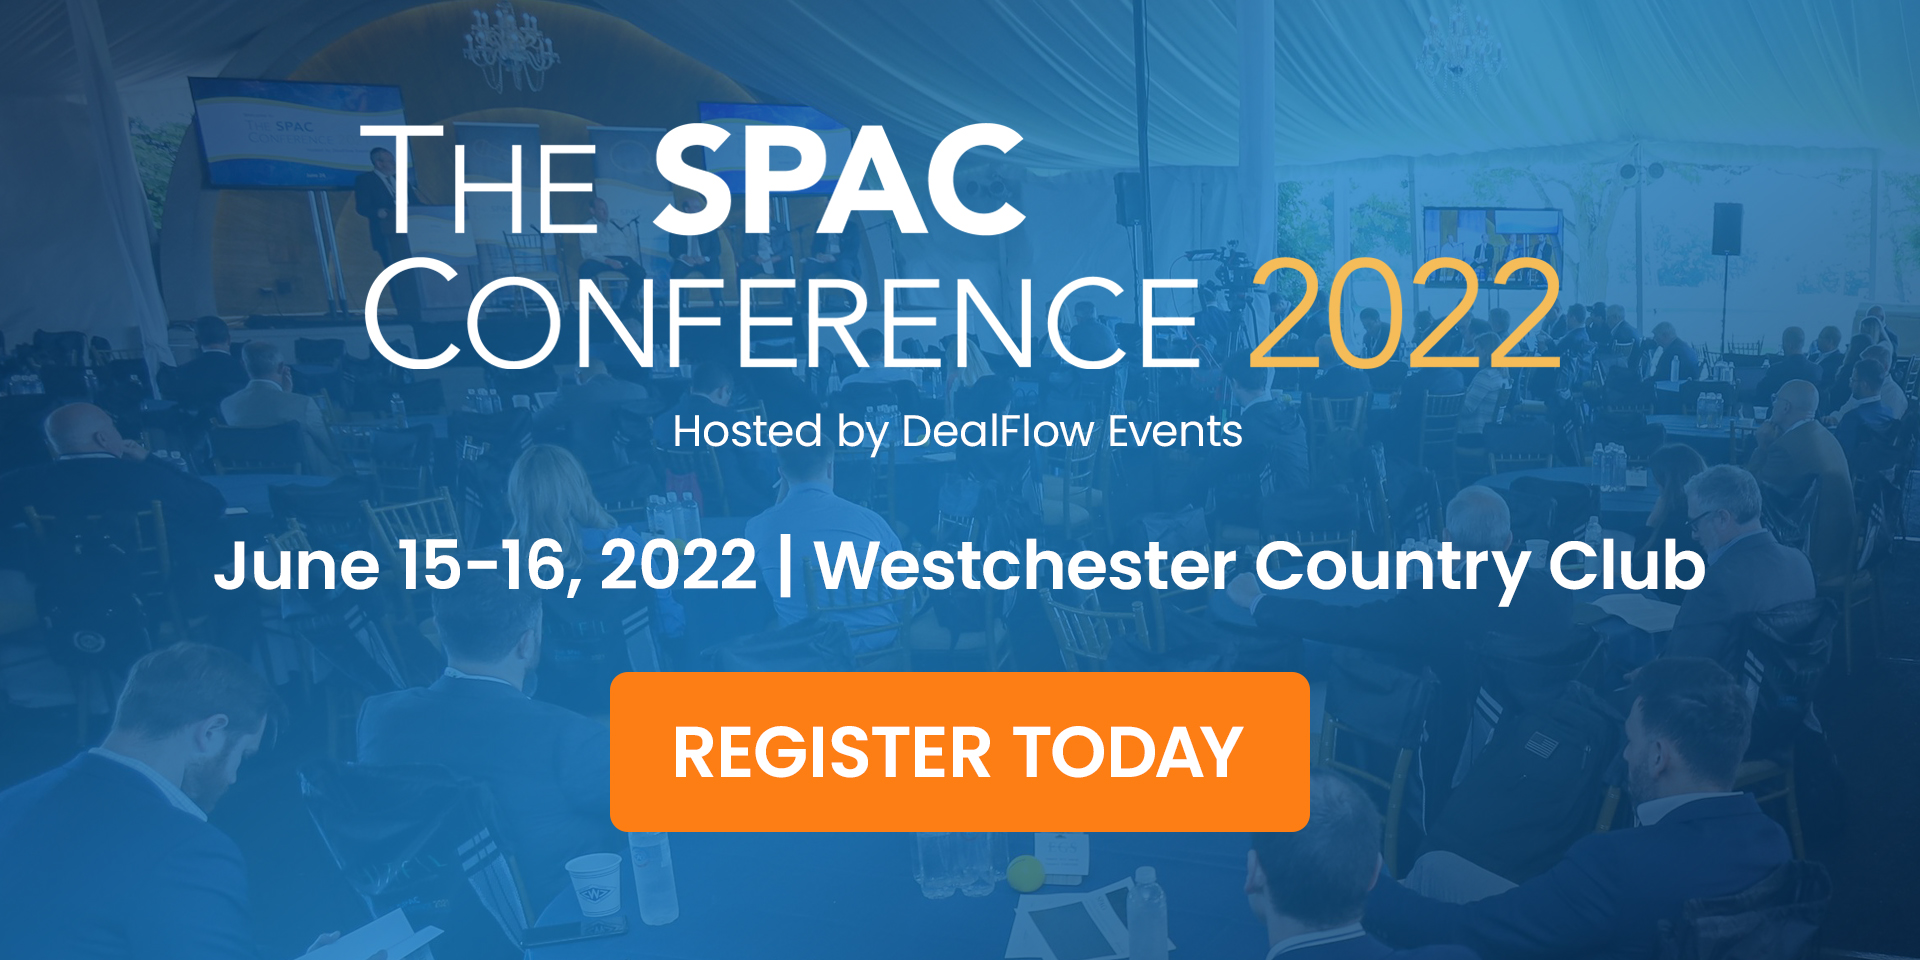 The SPAC Conference 2022 June 1516, 2022 Westchester Country Club